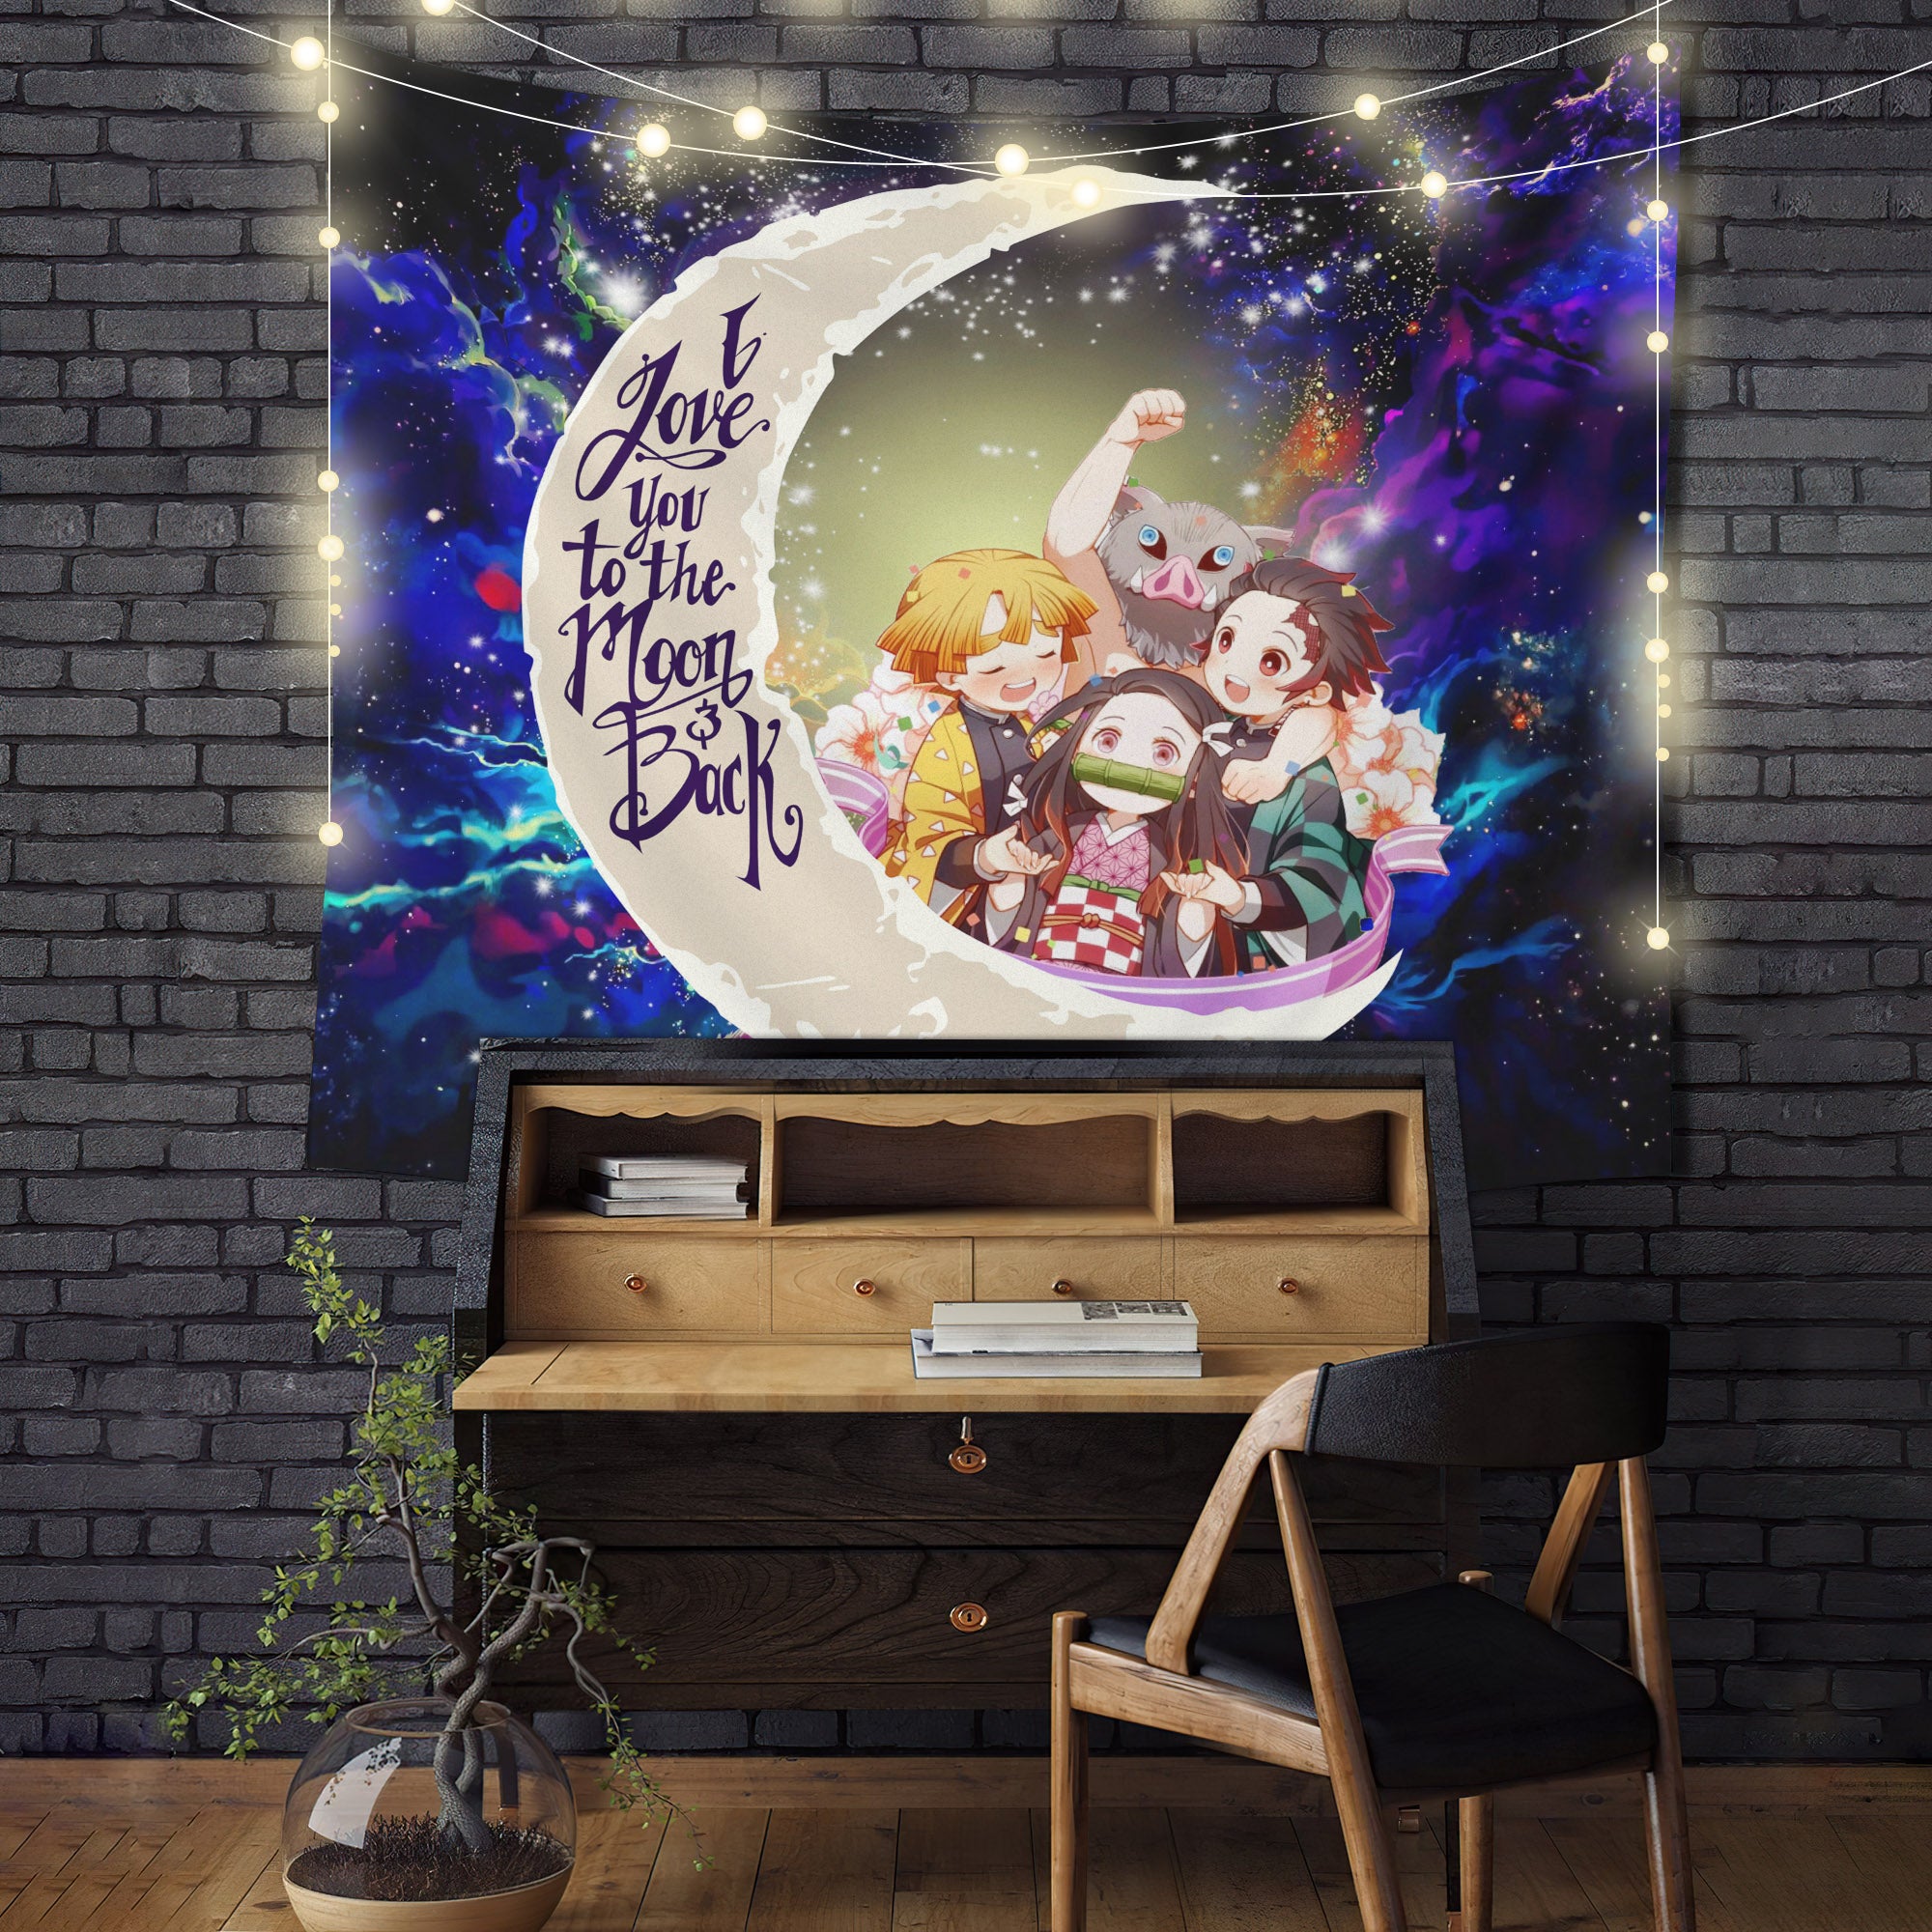 Demond Slayer Team Love You To The Moon Galaxy Tapestry Room Decor